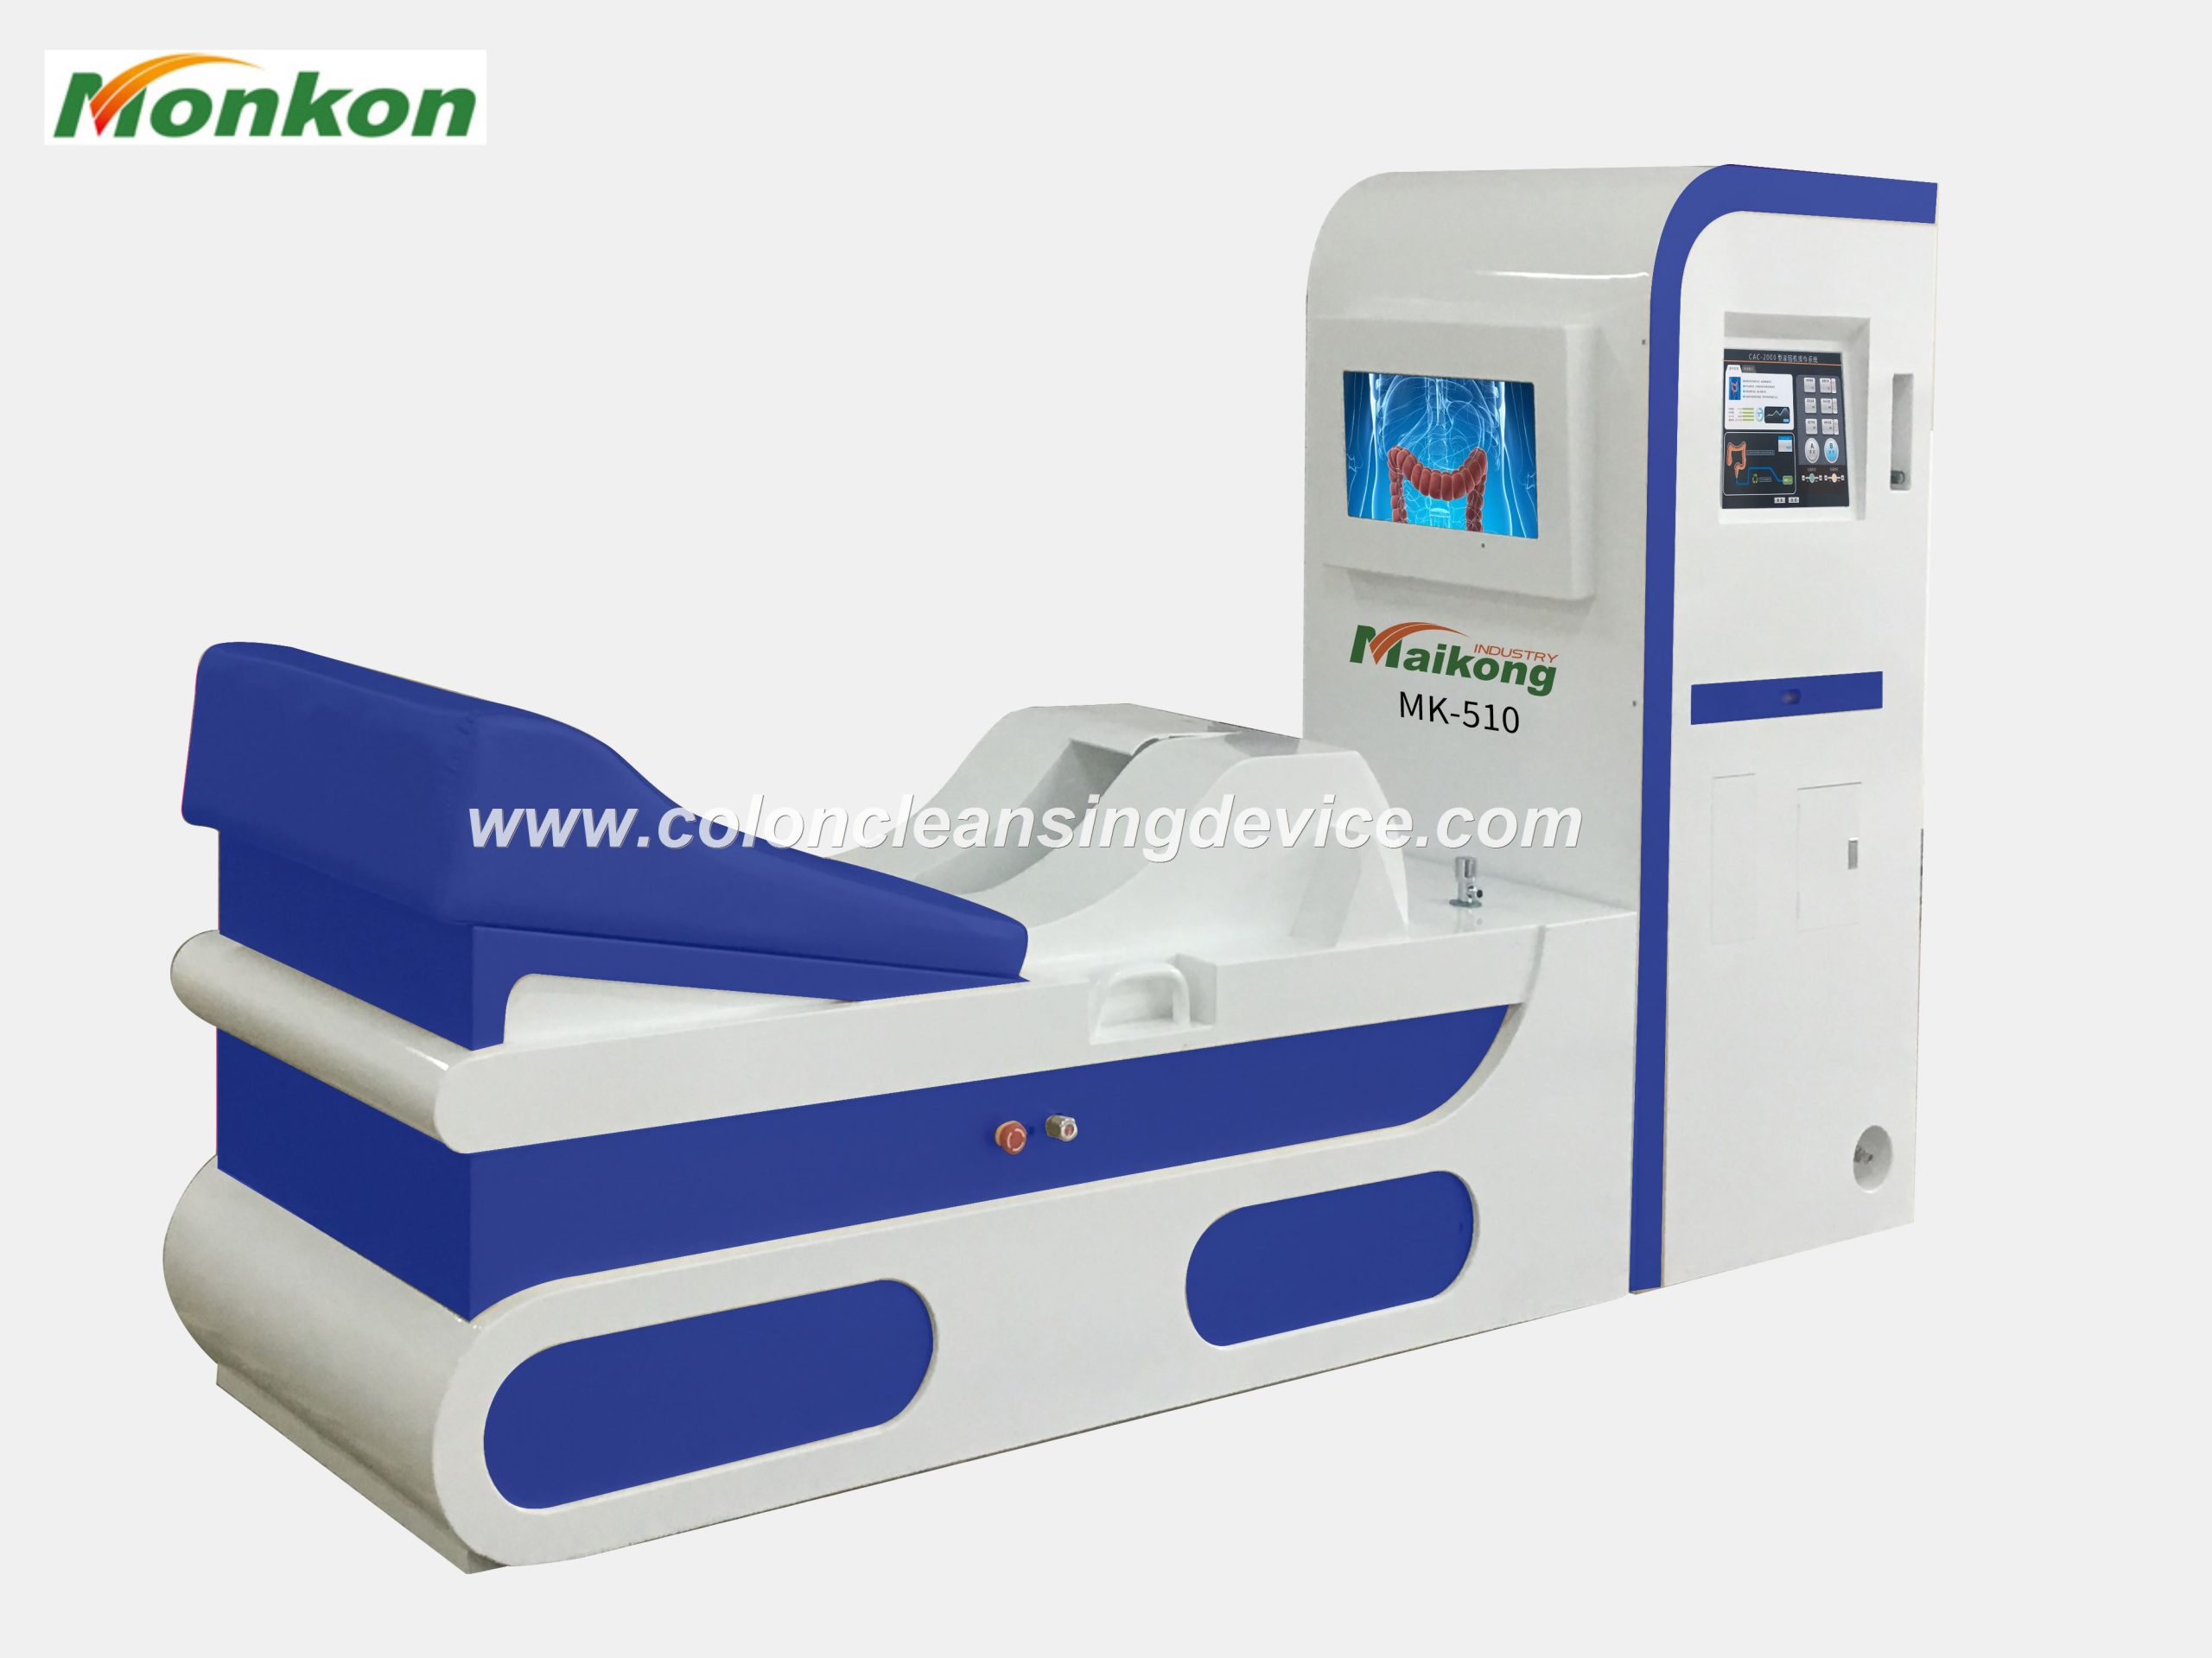 MAIKONG Colon cleansing machine cost